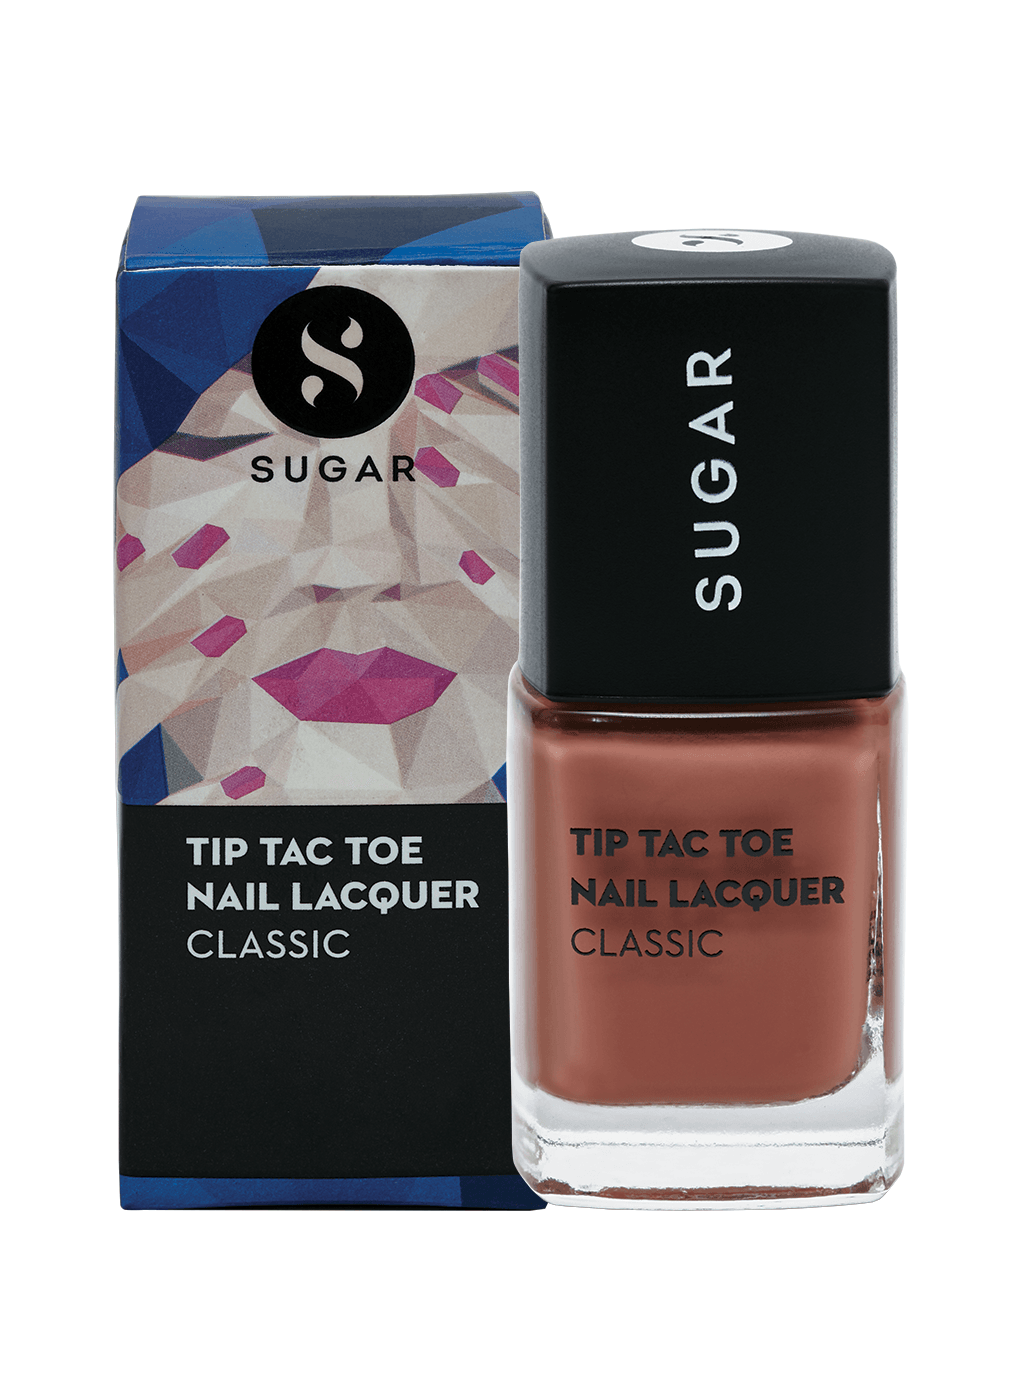 Tip Tac Toe Nail Lacquer - 006 Cookie Cutter (Medium Brown)